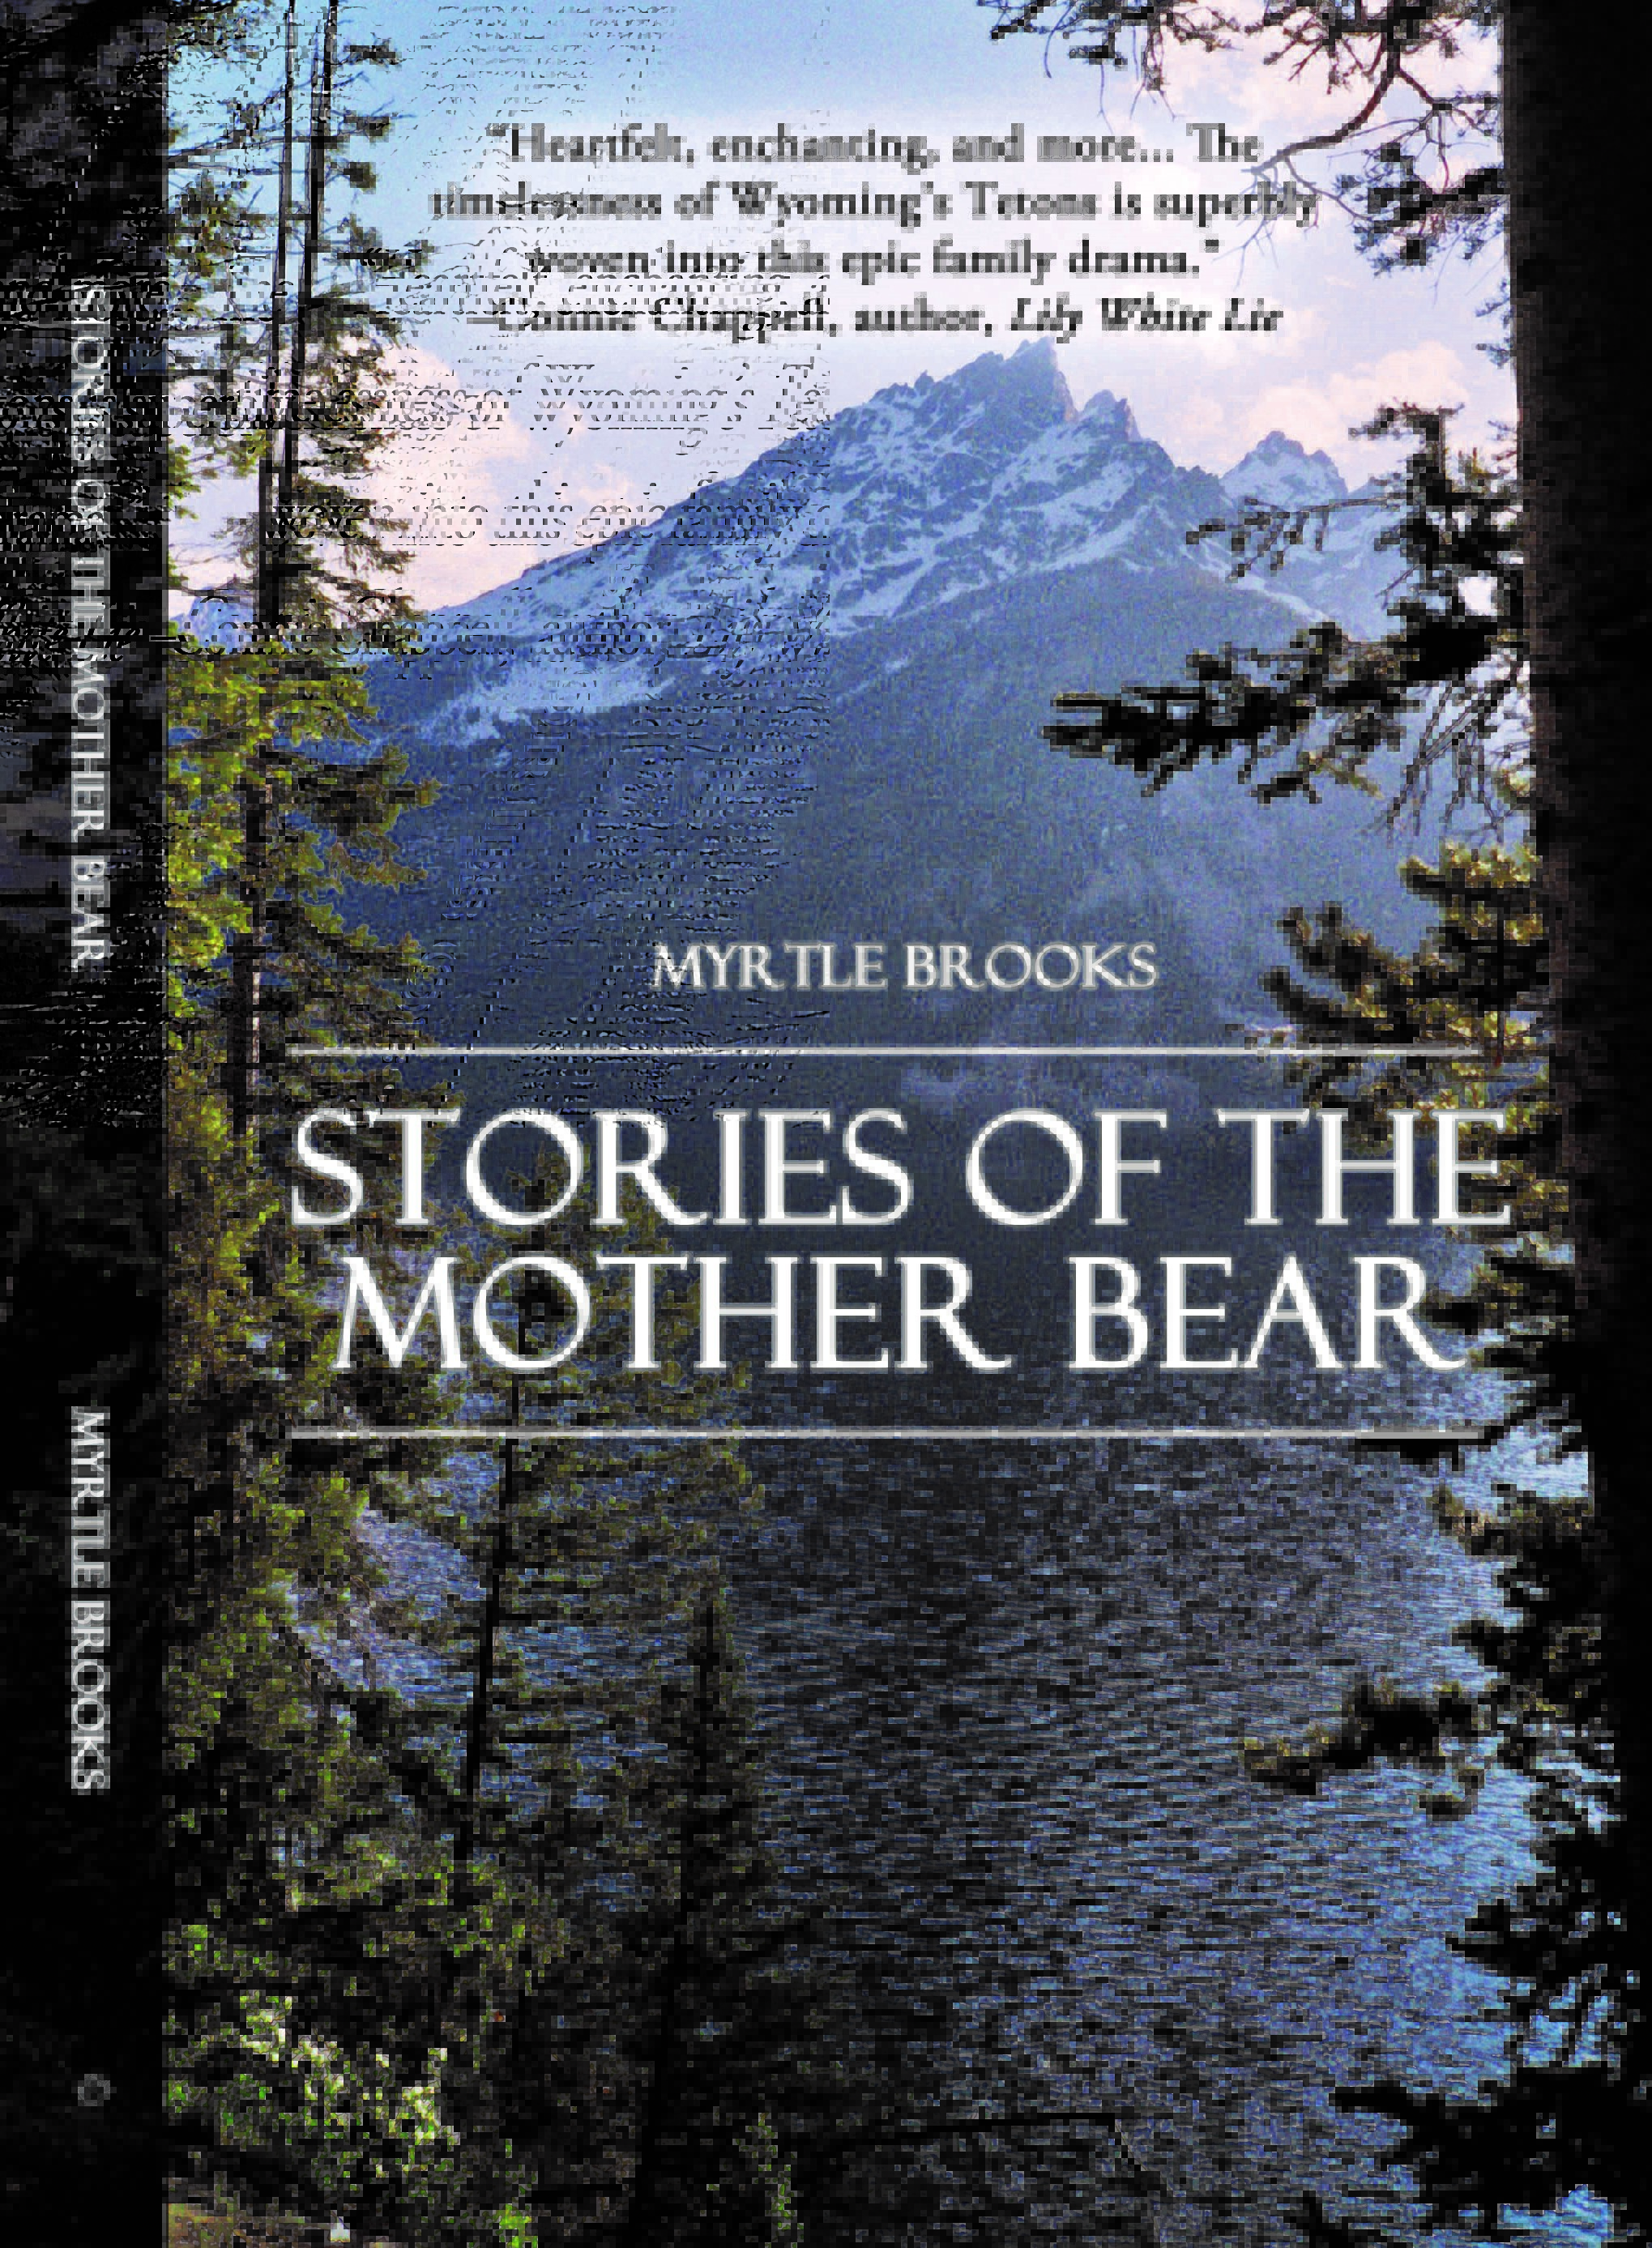 FREE: Stories of the Mother Bear by Myrtle Brooks